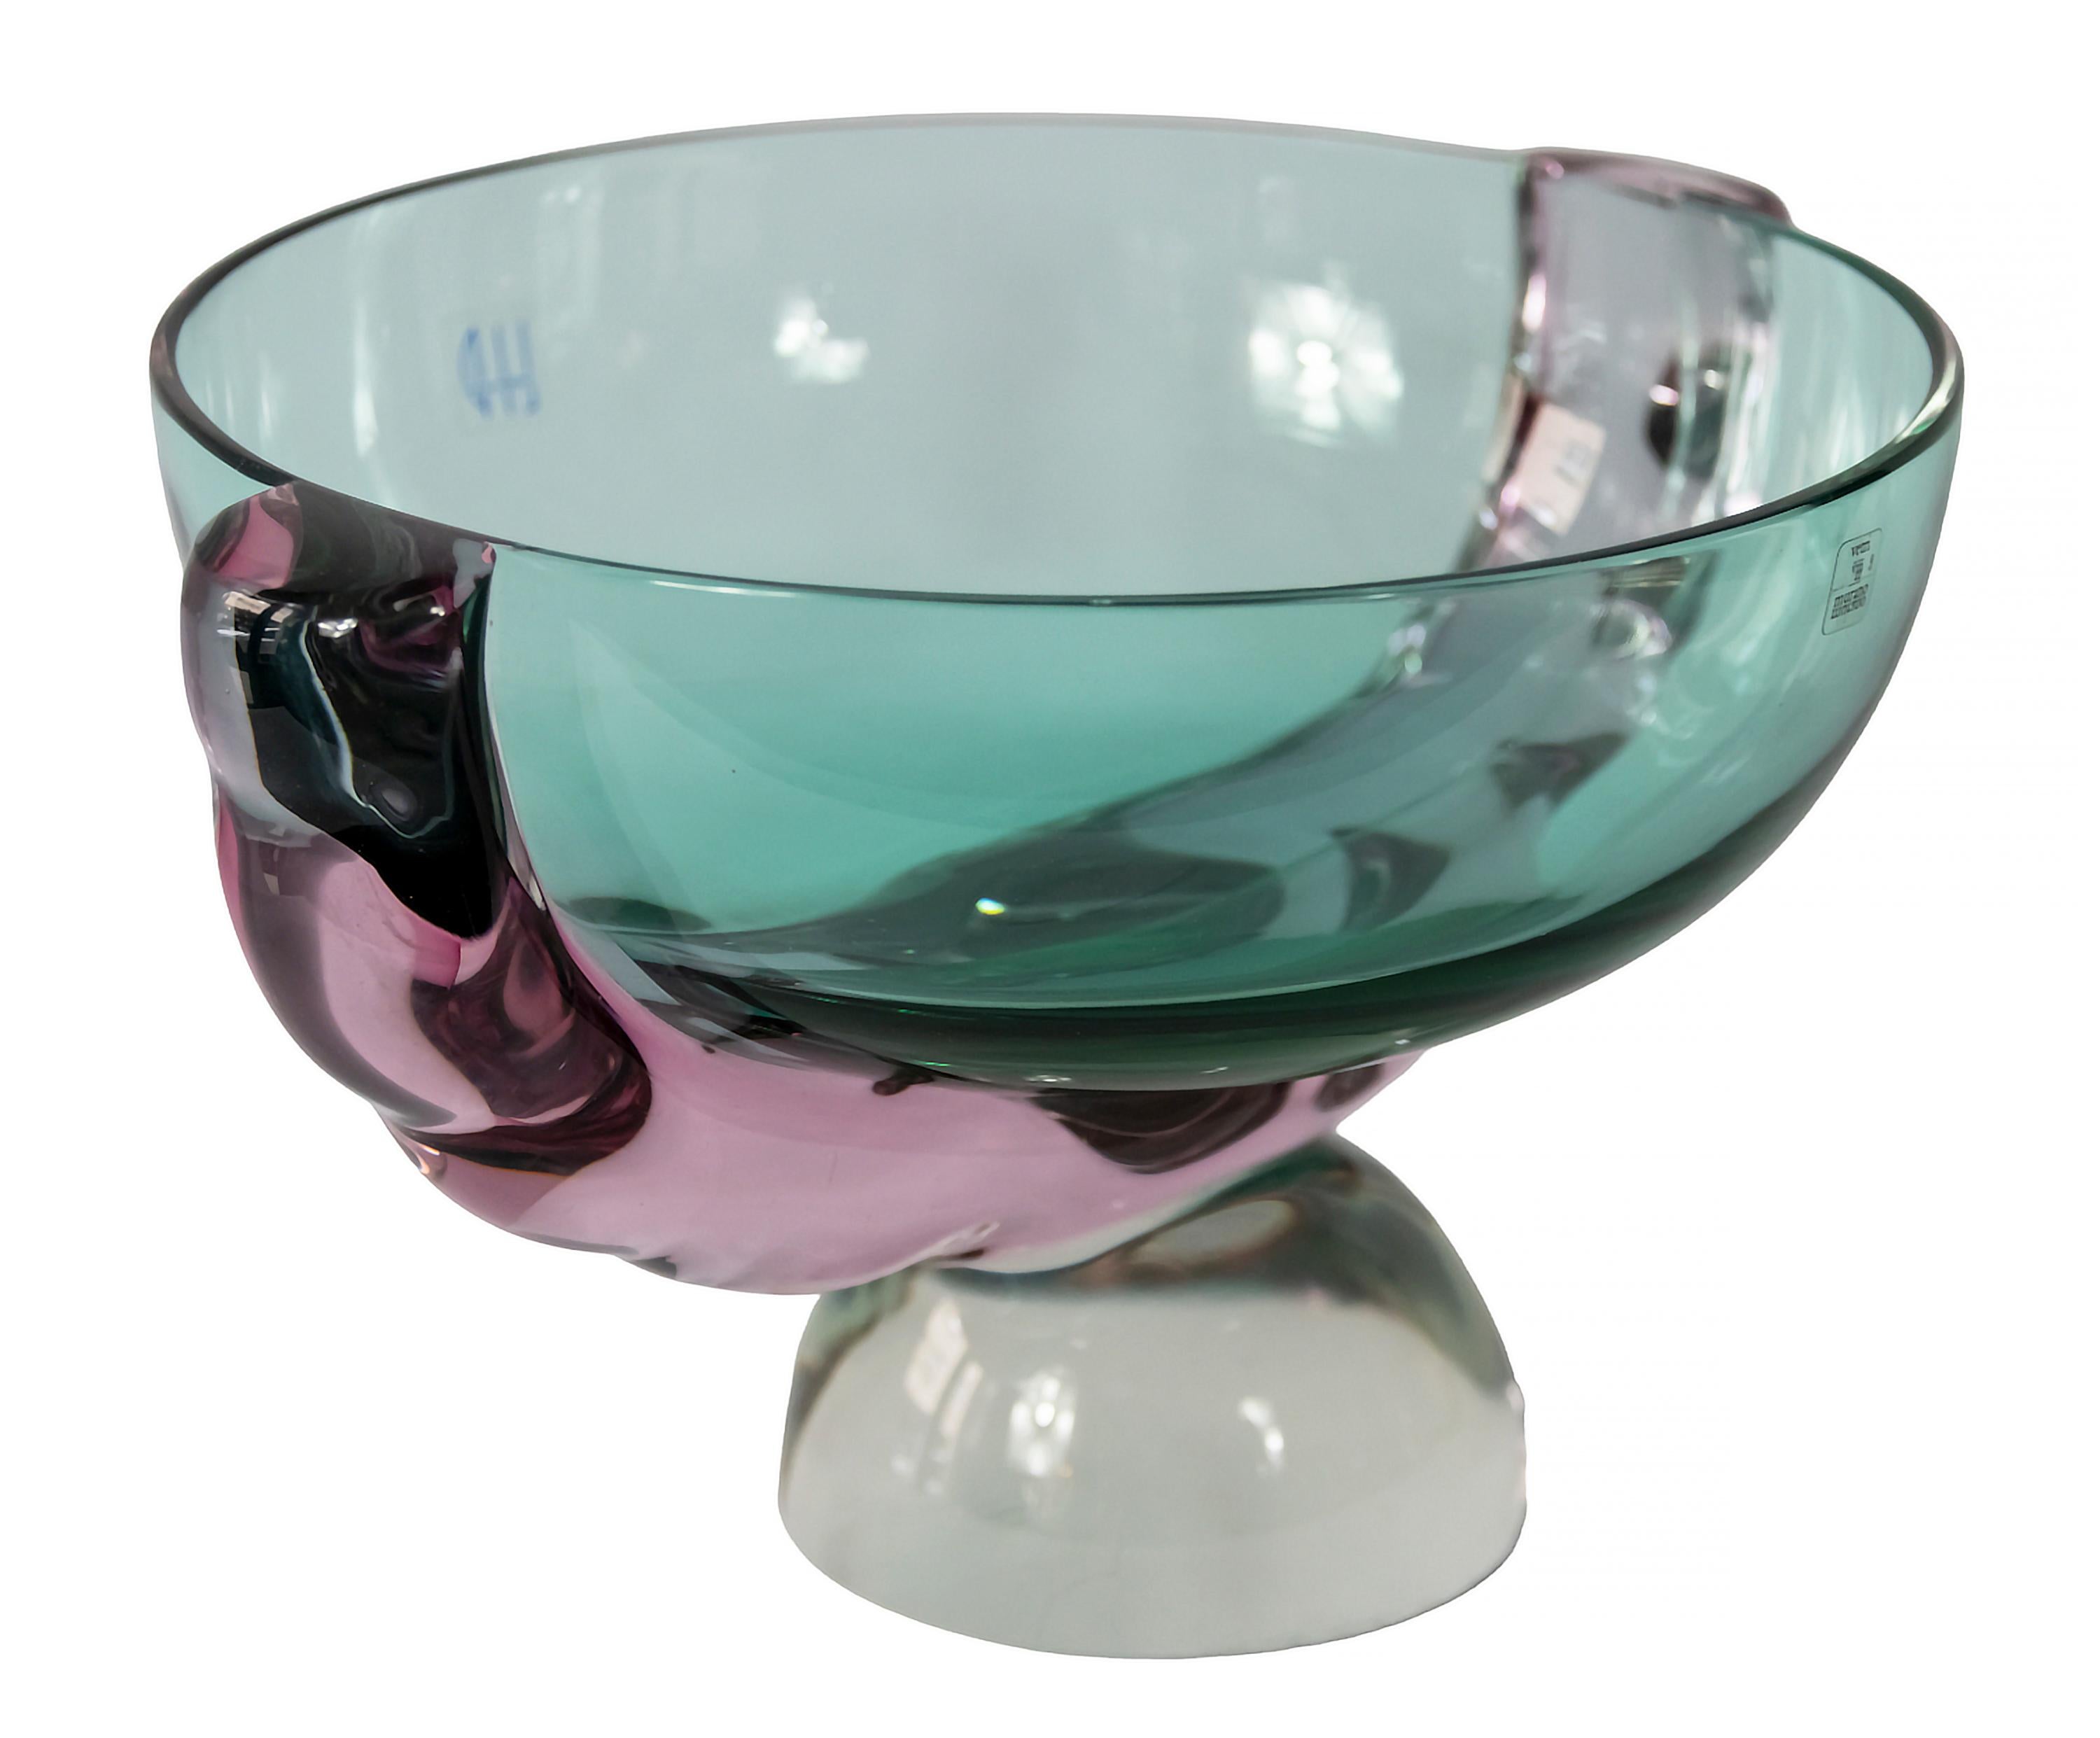 Vintage Italian handmade Murano glass asimetrical vase created and signed by Marcello Furlan, circa 1990.
The glass colors are light green emerald and pink on clear glass base. 
This vase is solid and very heavy.